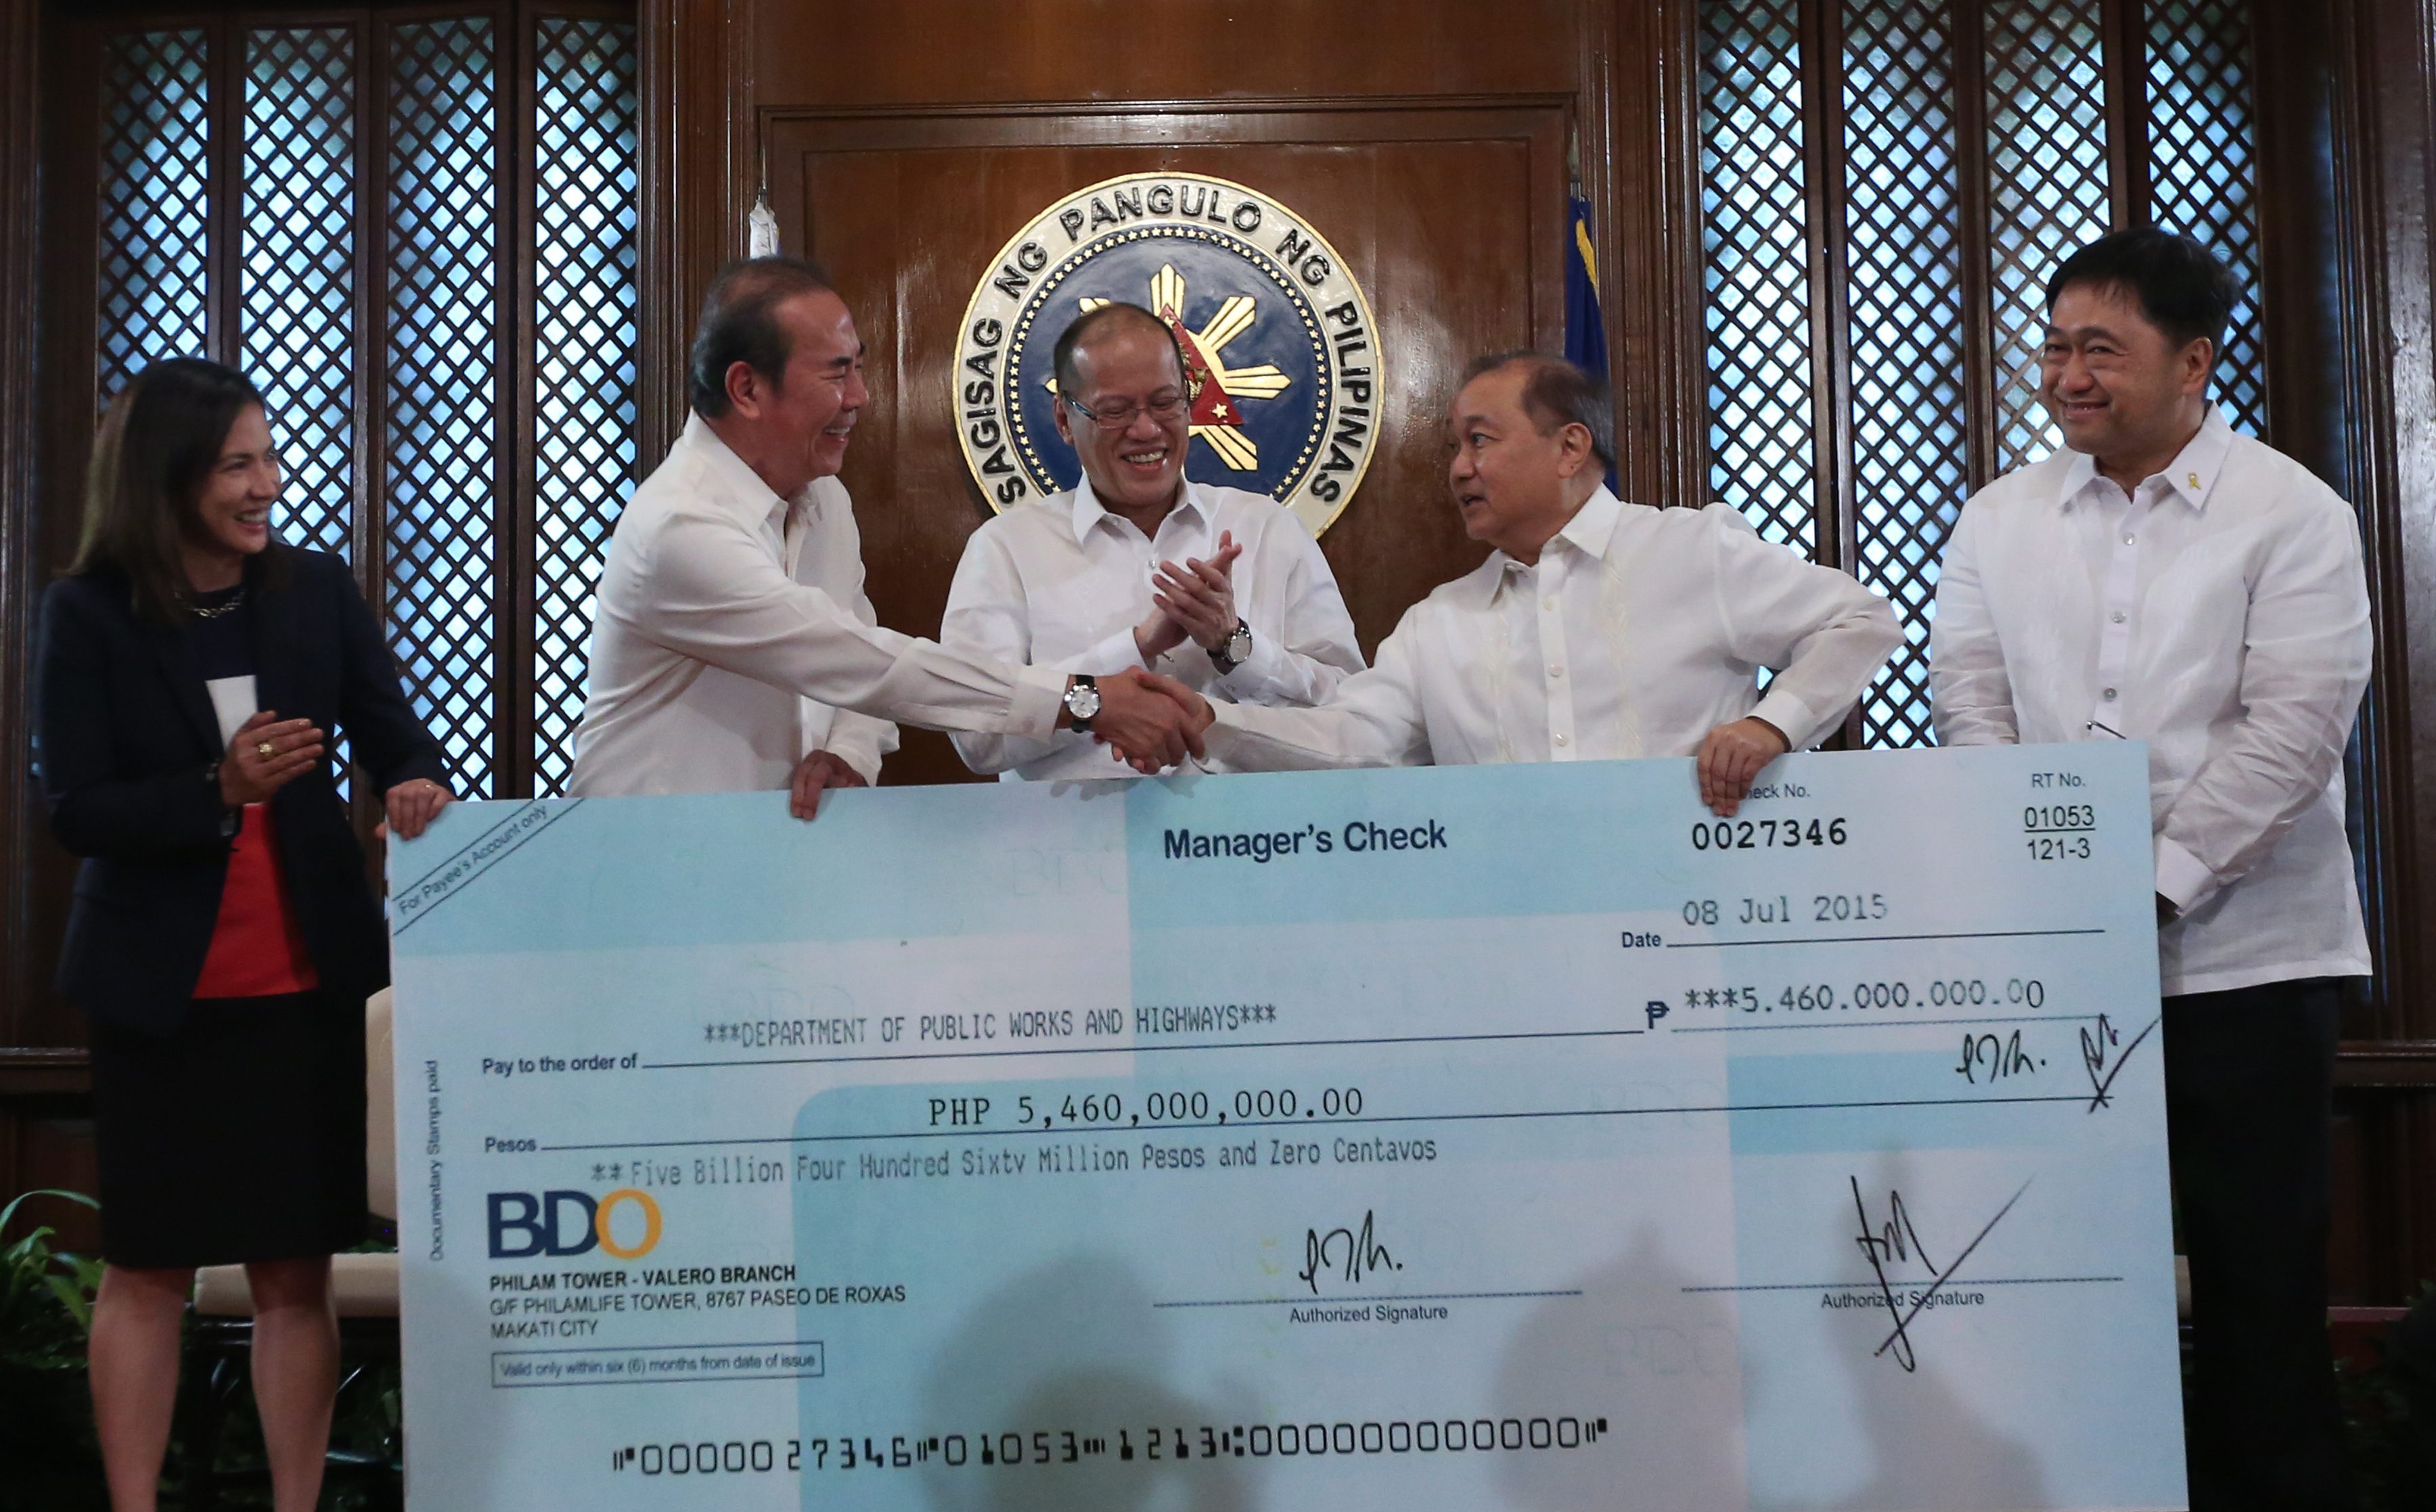 TURNOVER. President Benigno Aquino III witnesses the turnover of a check by MPIC's Manuel Pangilinan to DPWH Secretary Rogelio Singson during the project briefing on the Cavite-Laguna Expressway Project at Malacañang. Also in the photo are PPP Center's Cosette Canilao (extreme left), and Finance Secretary Cesar Purisima (extreme right). Photo by Robert Viñas/Malacañang Photo Bureau  